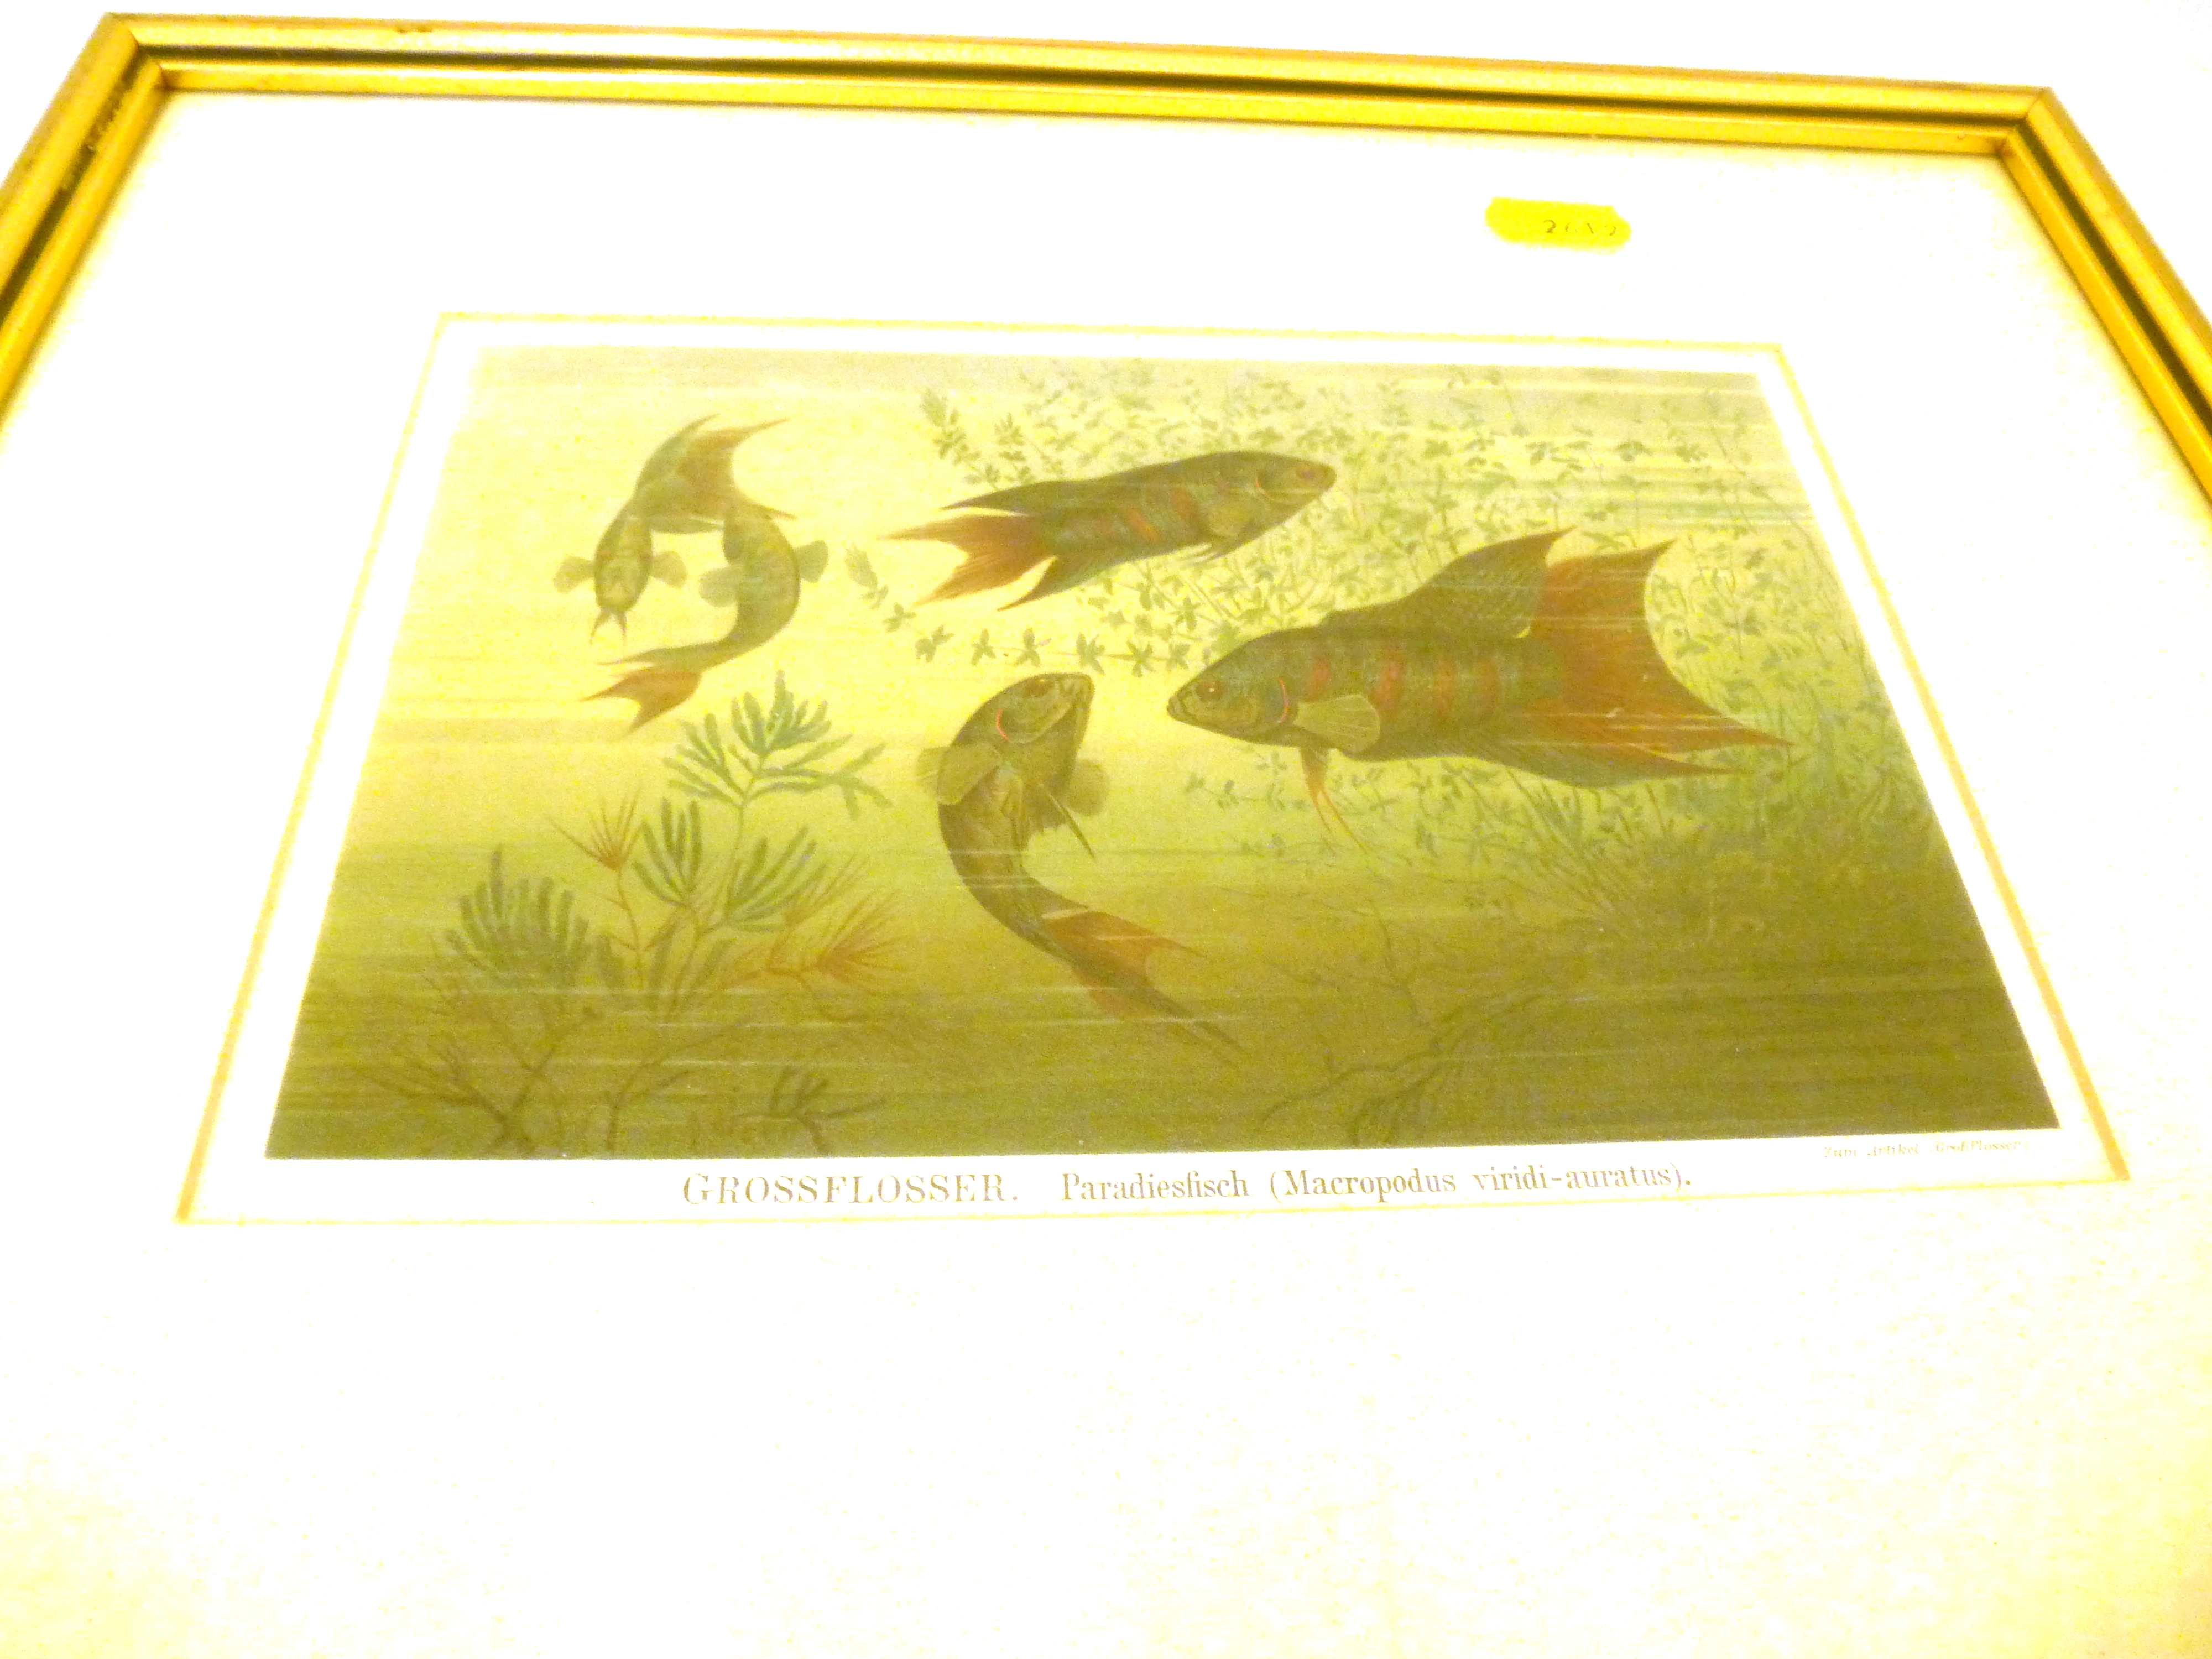 3 FRAMED 1896 GERMAN CHROMO LITHOGRAPHS DEPICTING MARINE LIFE APPROX 5.75" X 8.25" - Image 3 of 4